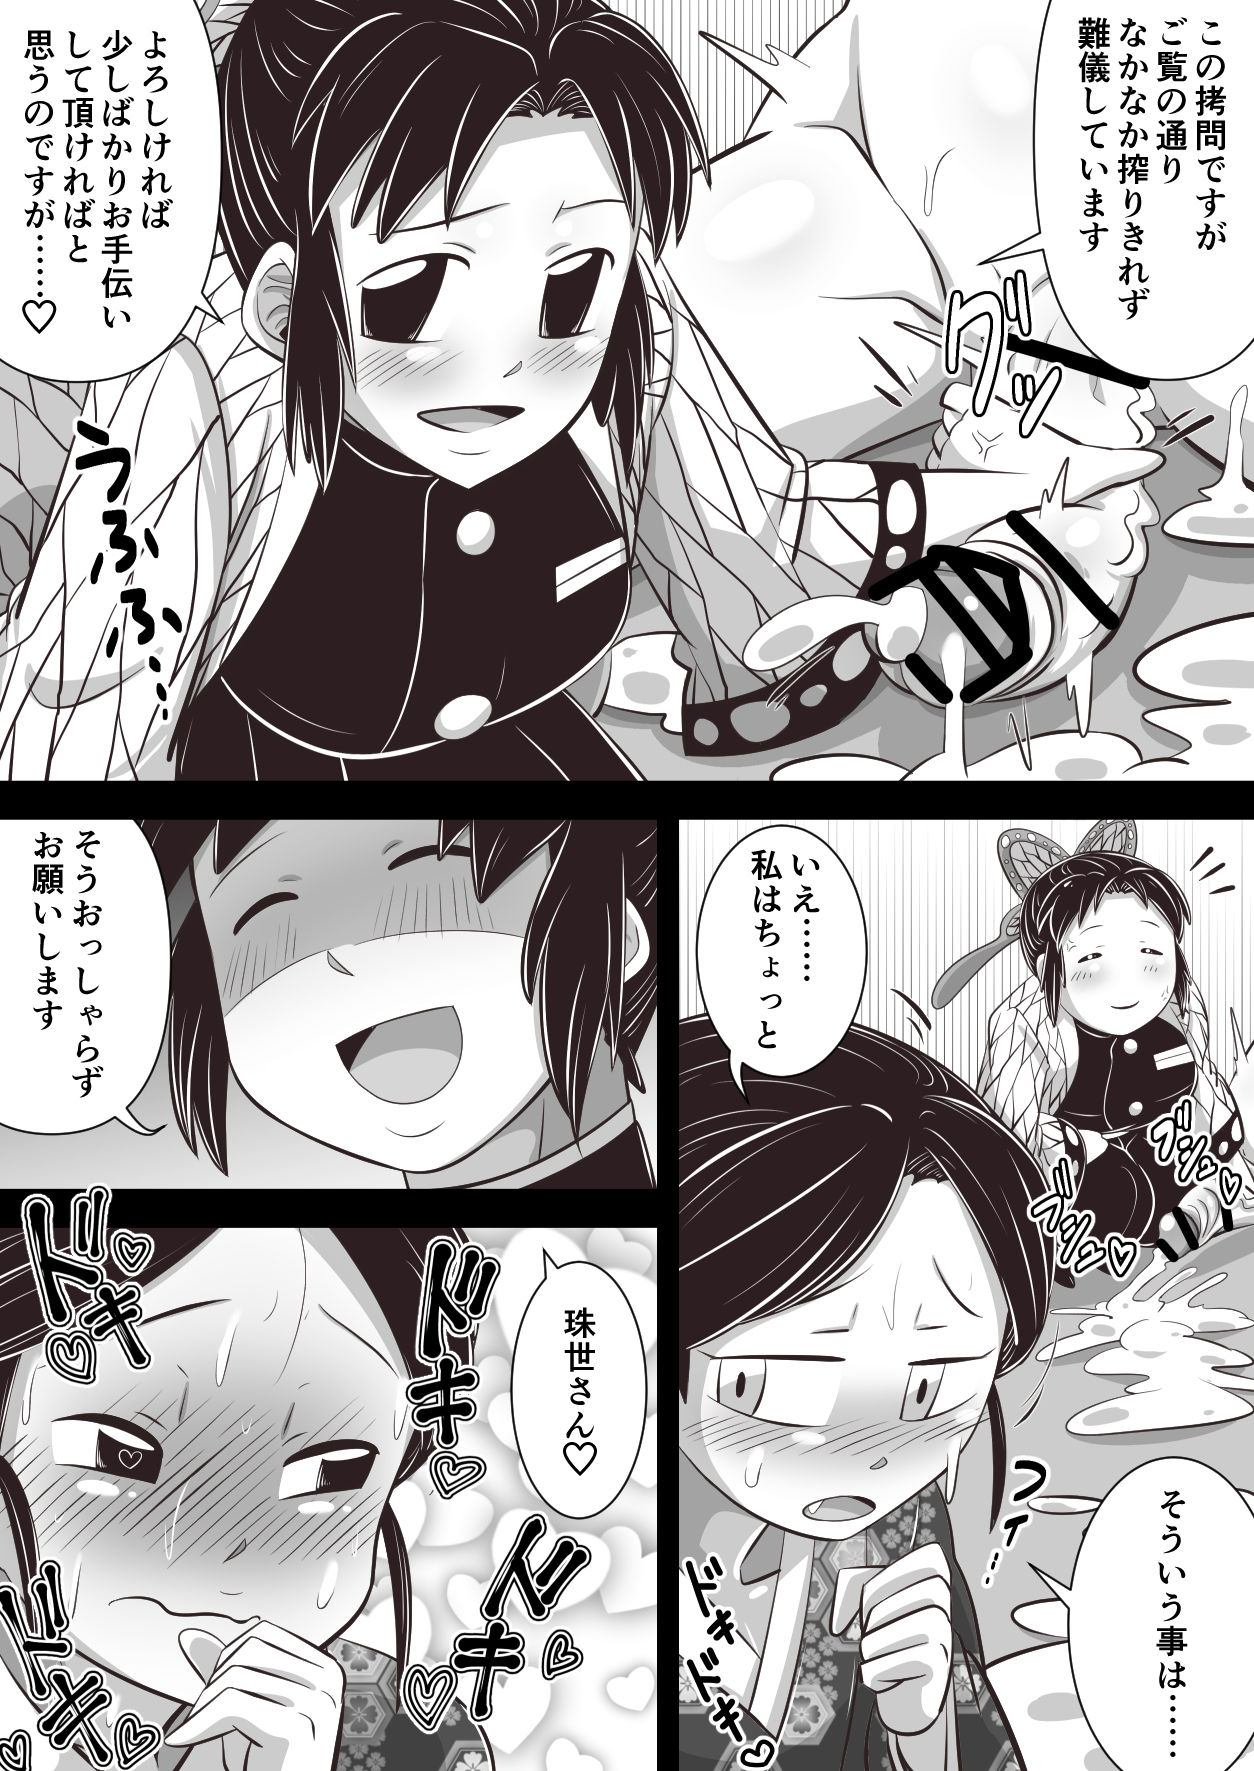 [Nightmare] Shino x Tama~ Love Blooms from Torture? page 7 full